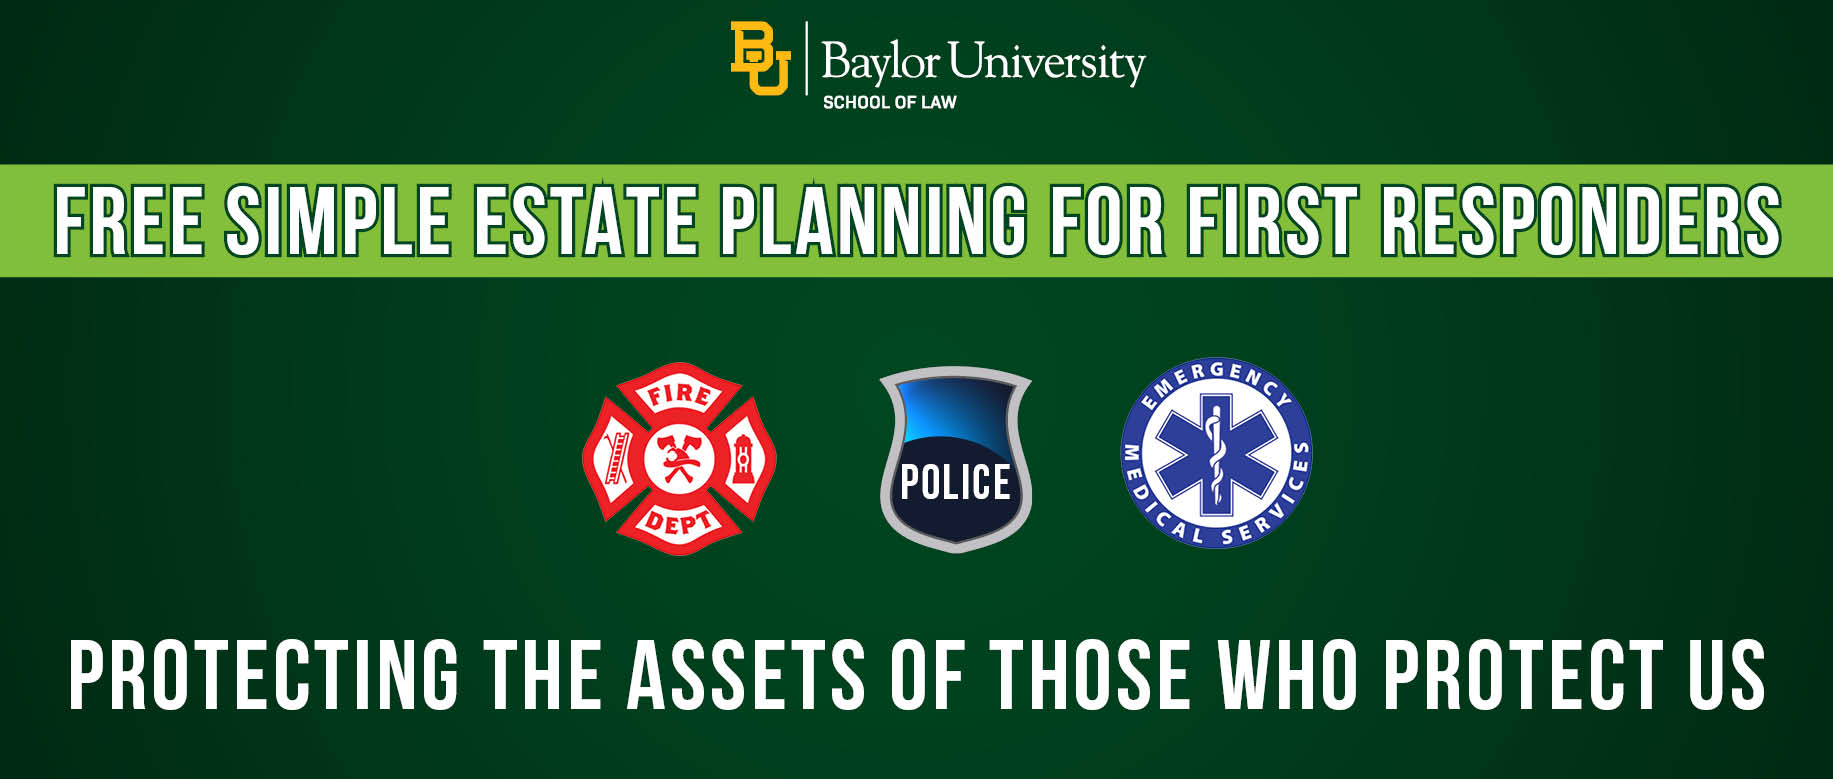 Banner For Free Simple Estate Planning For First Responders